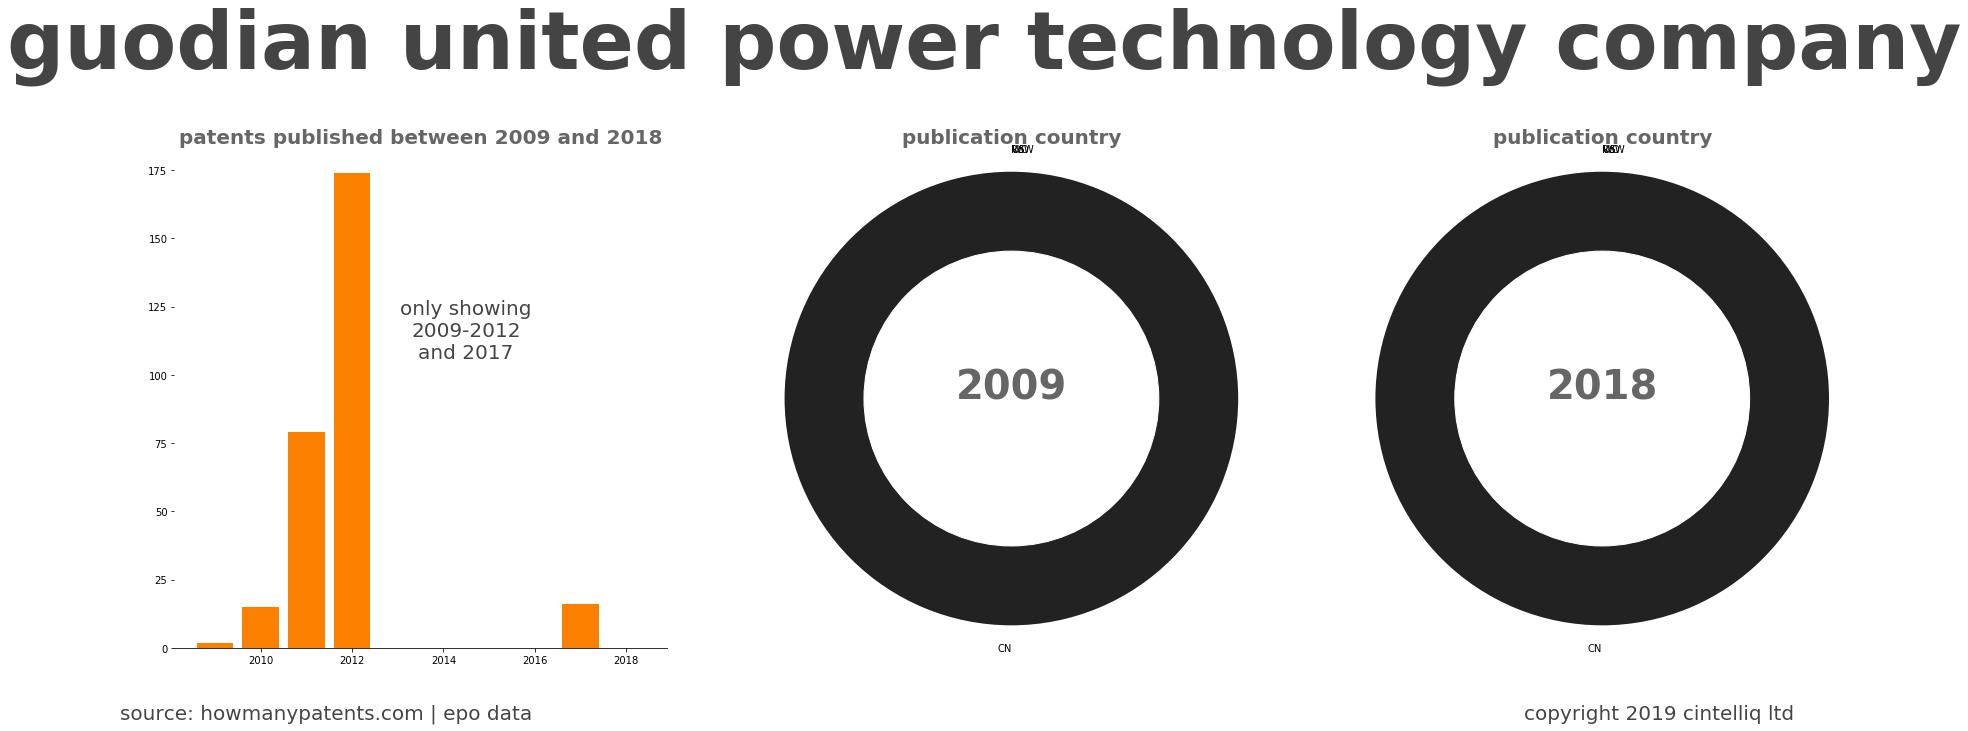 summary of patents for Guodian United Power Technology Company